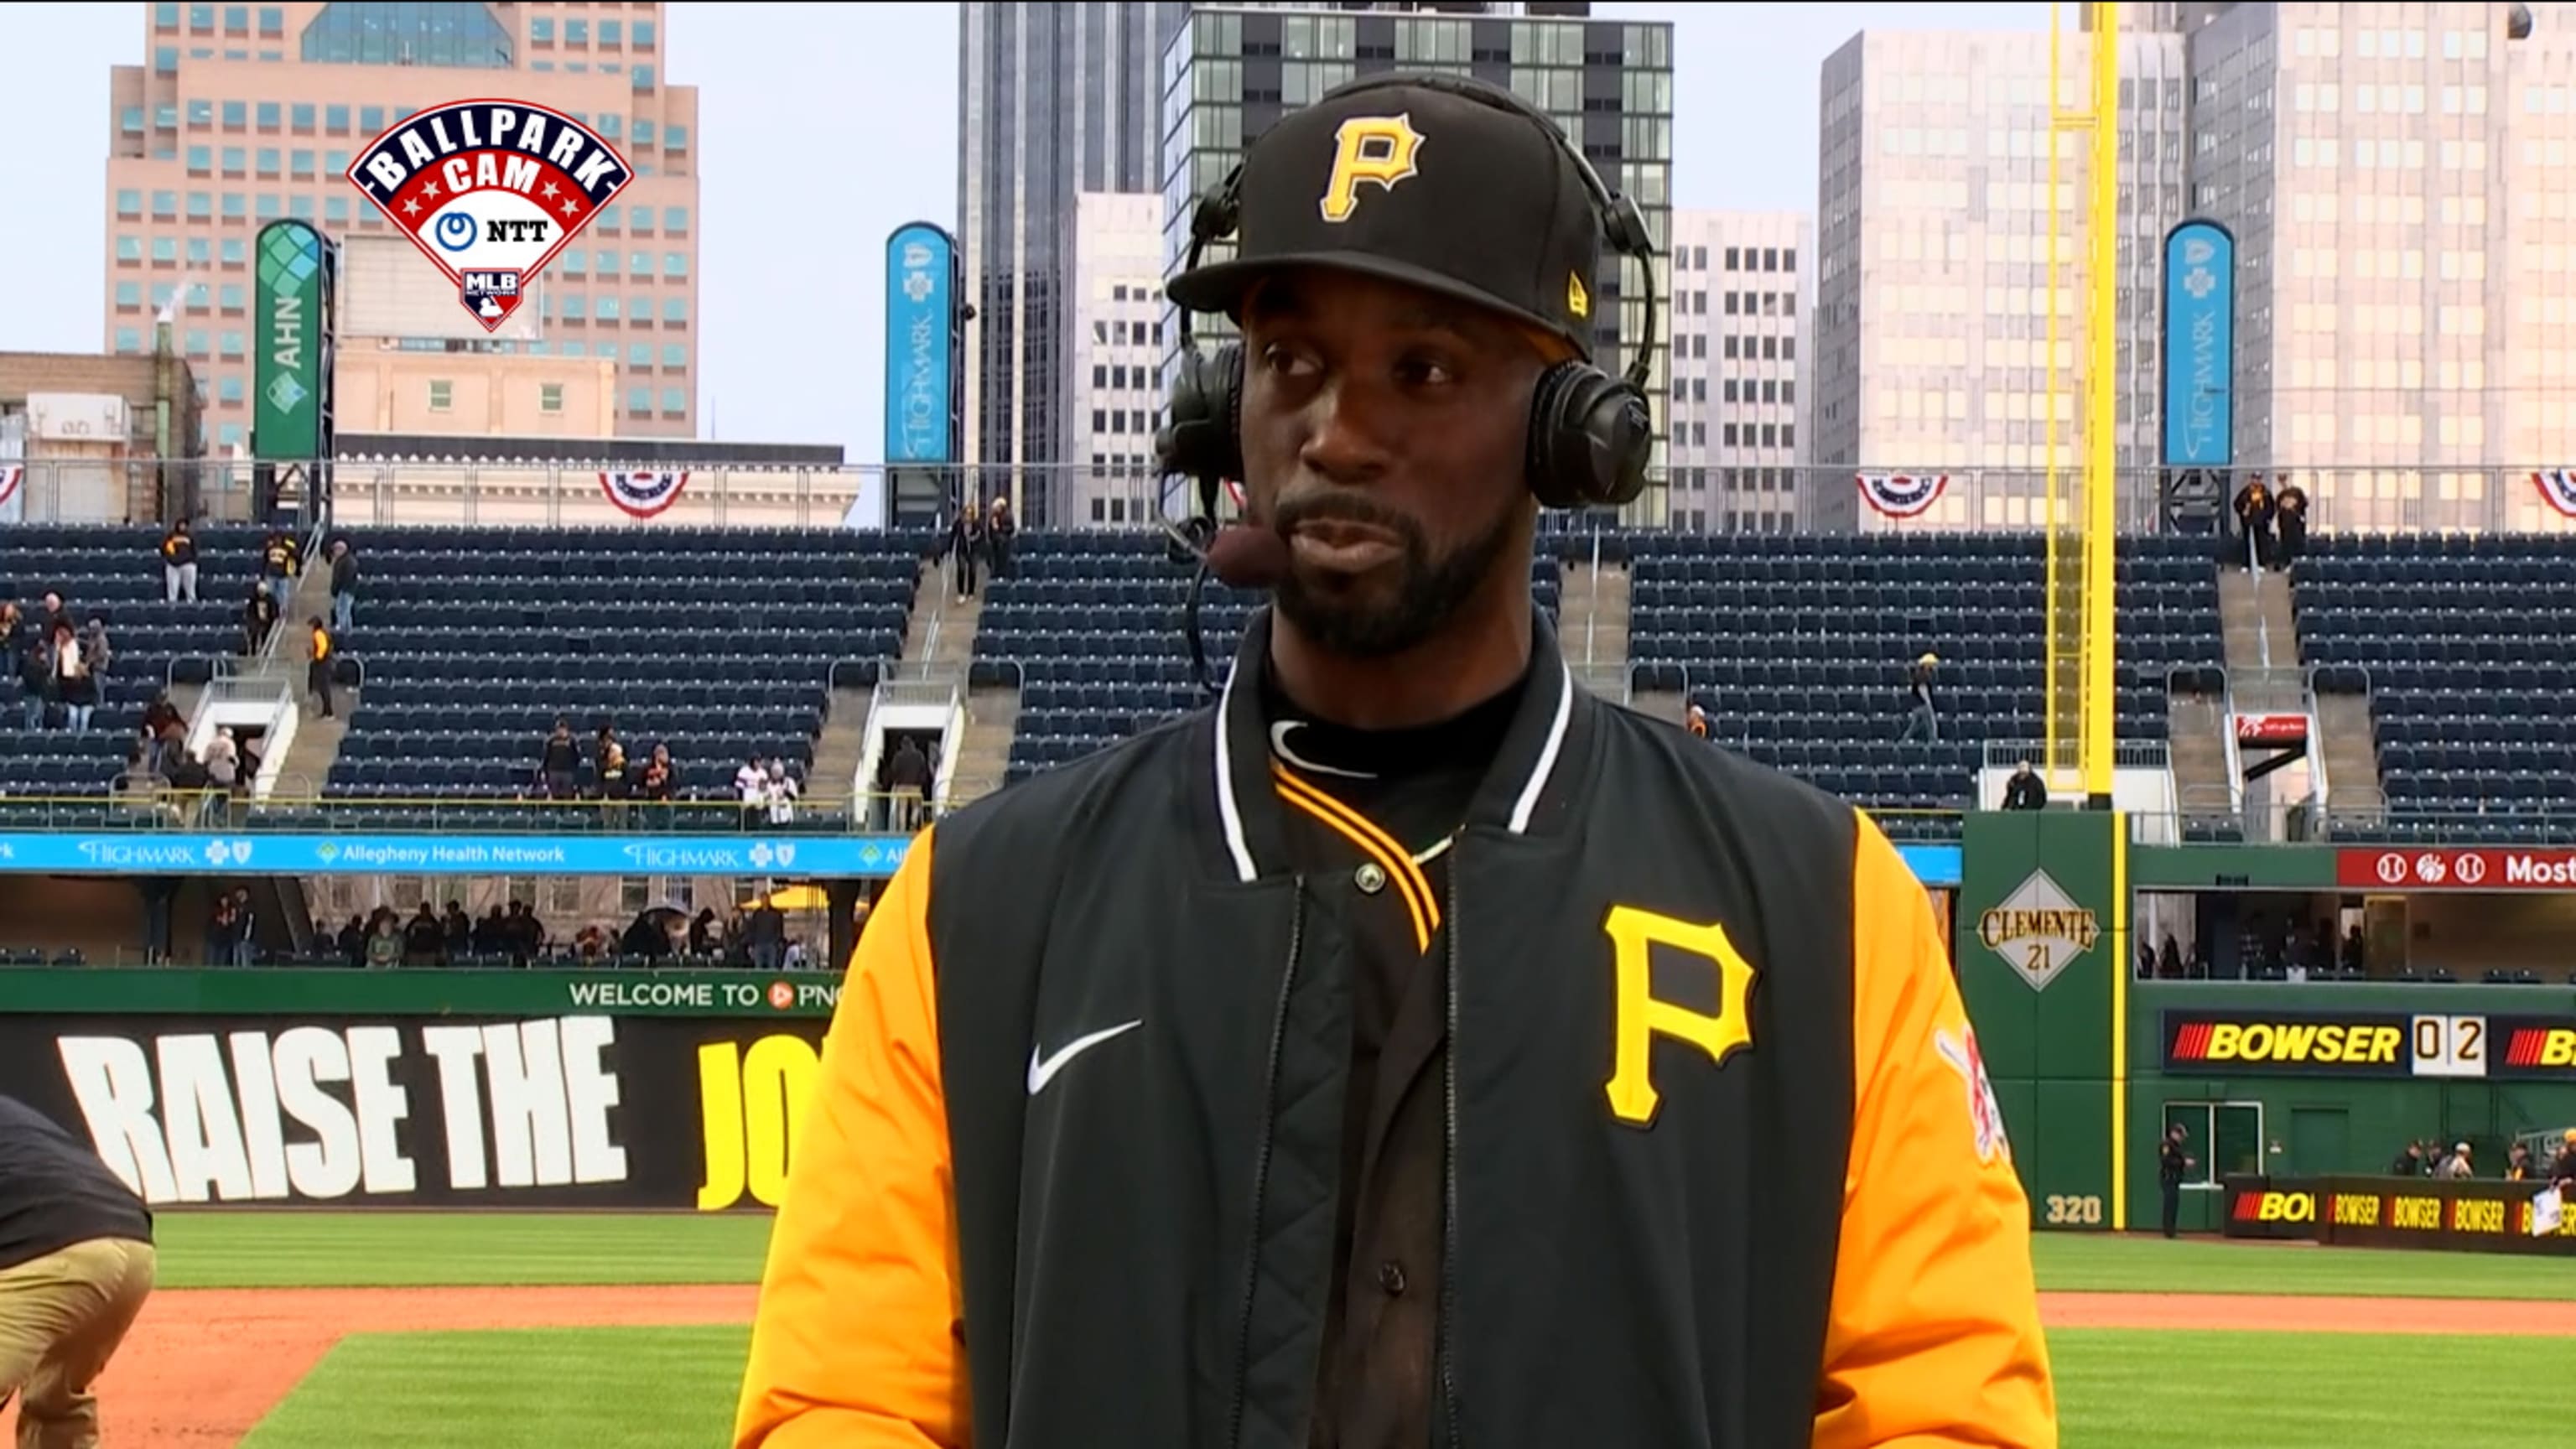 Andrew McCutchen ready for his PNC Park homecoming, a day to